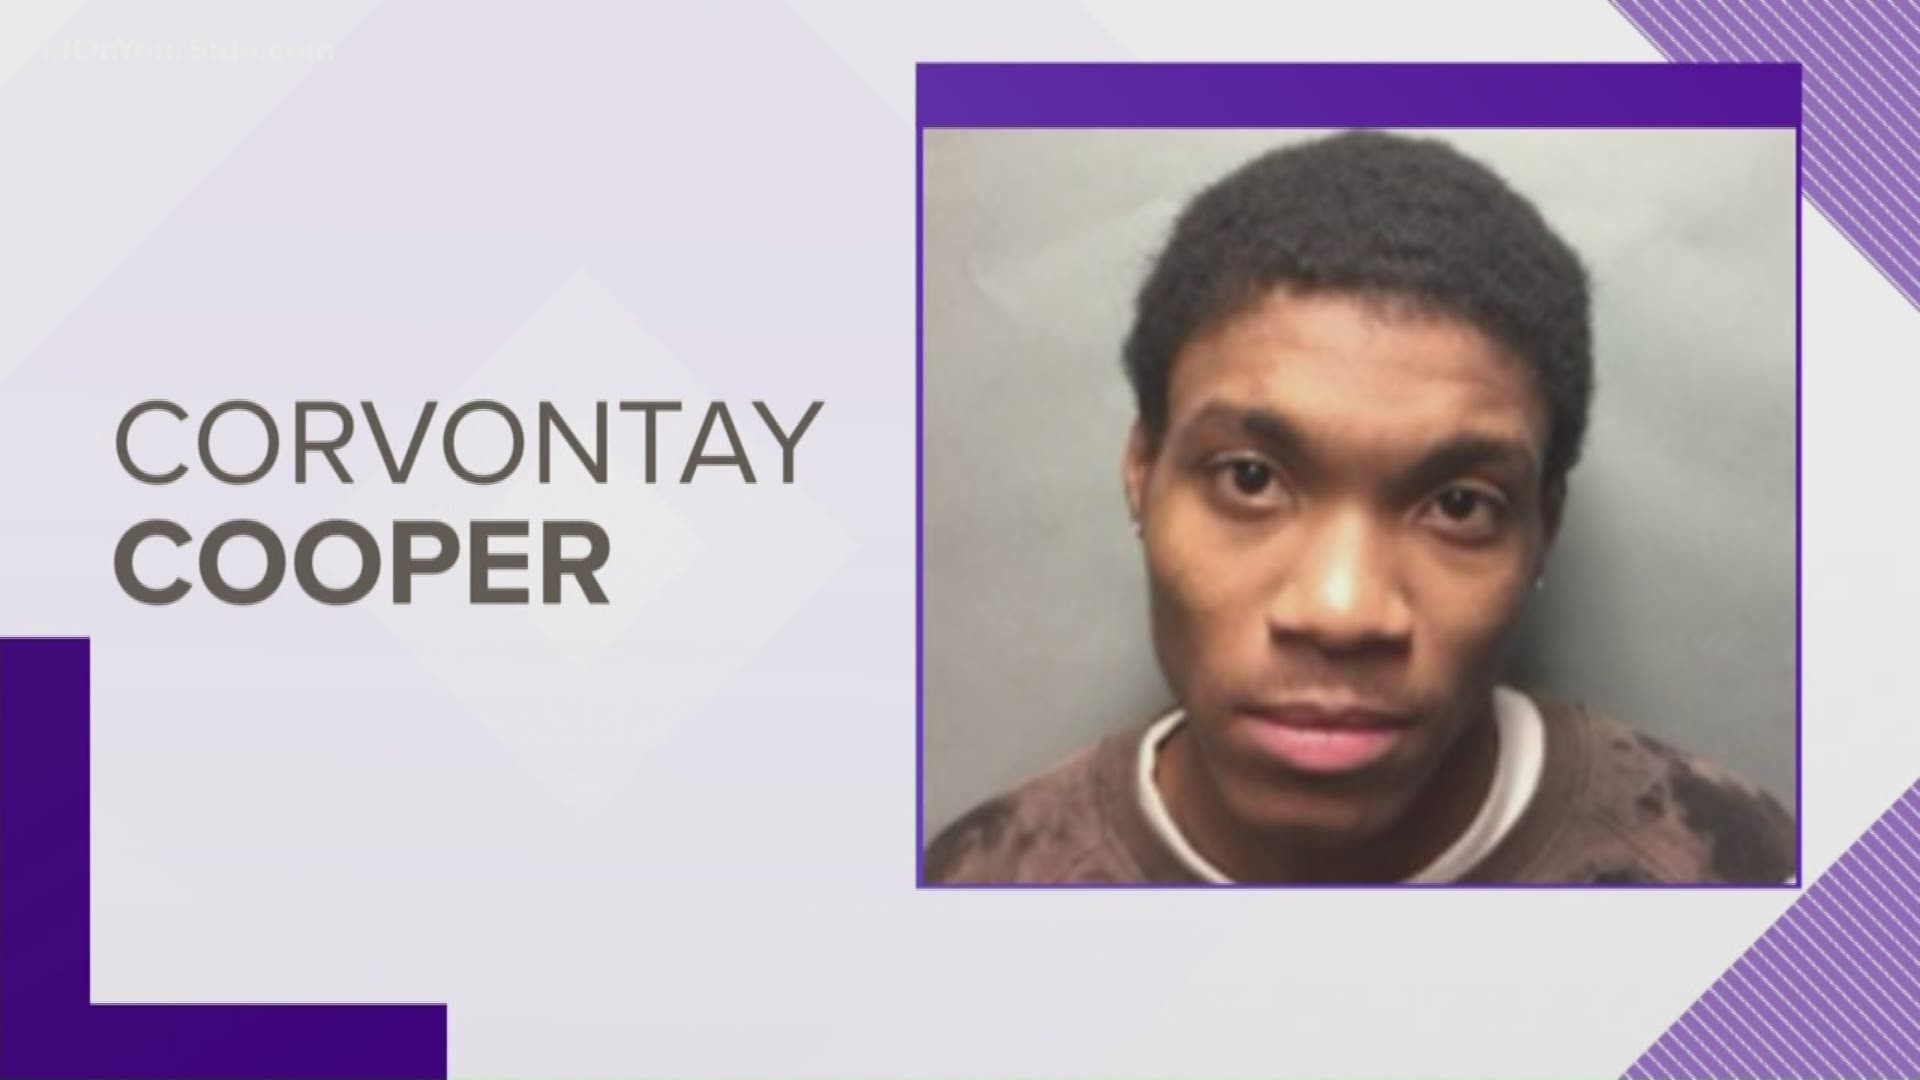 A federal prosecutor said Corvontay Cooper has a 'troubling history related to narcotics,' which includes an April arrest involving heroin and a loaded handgun.